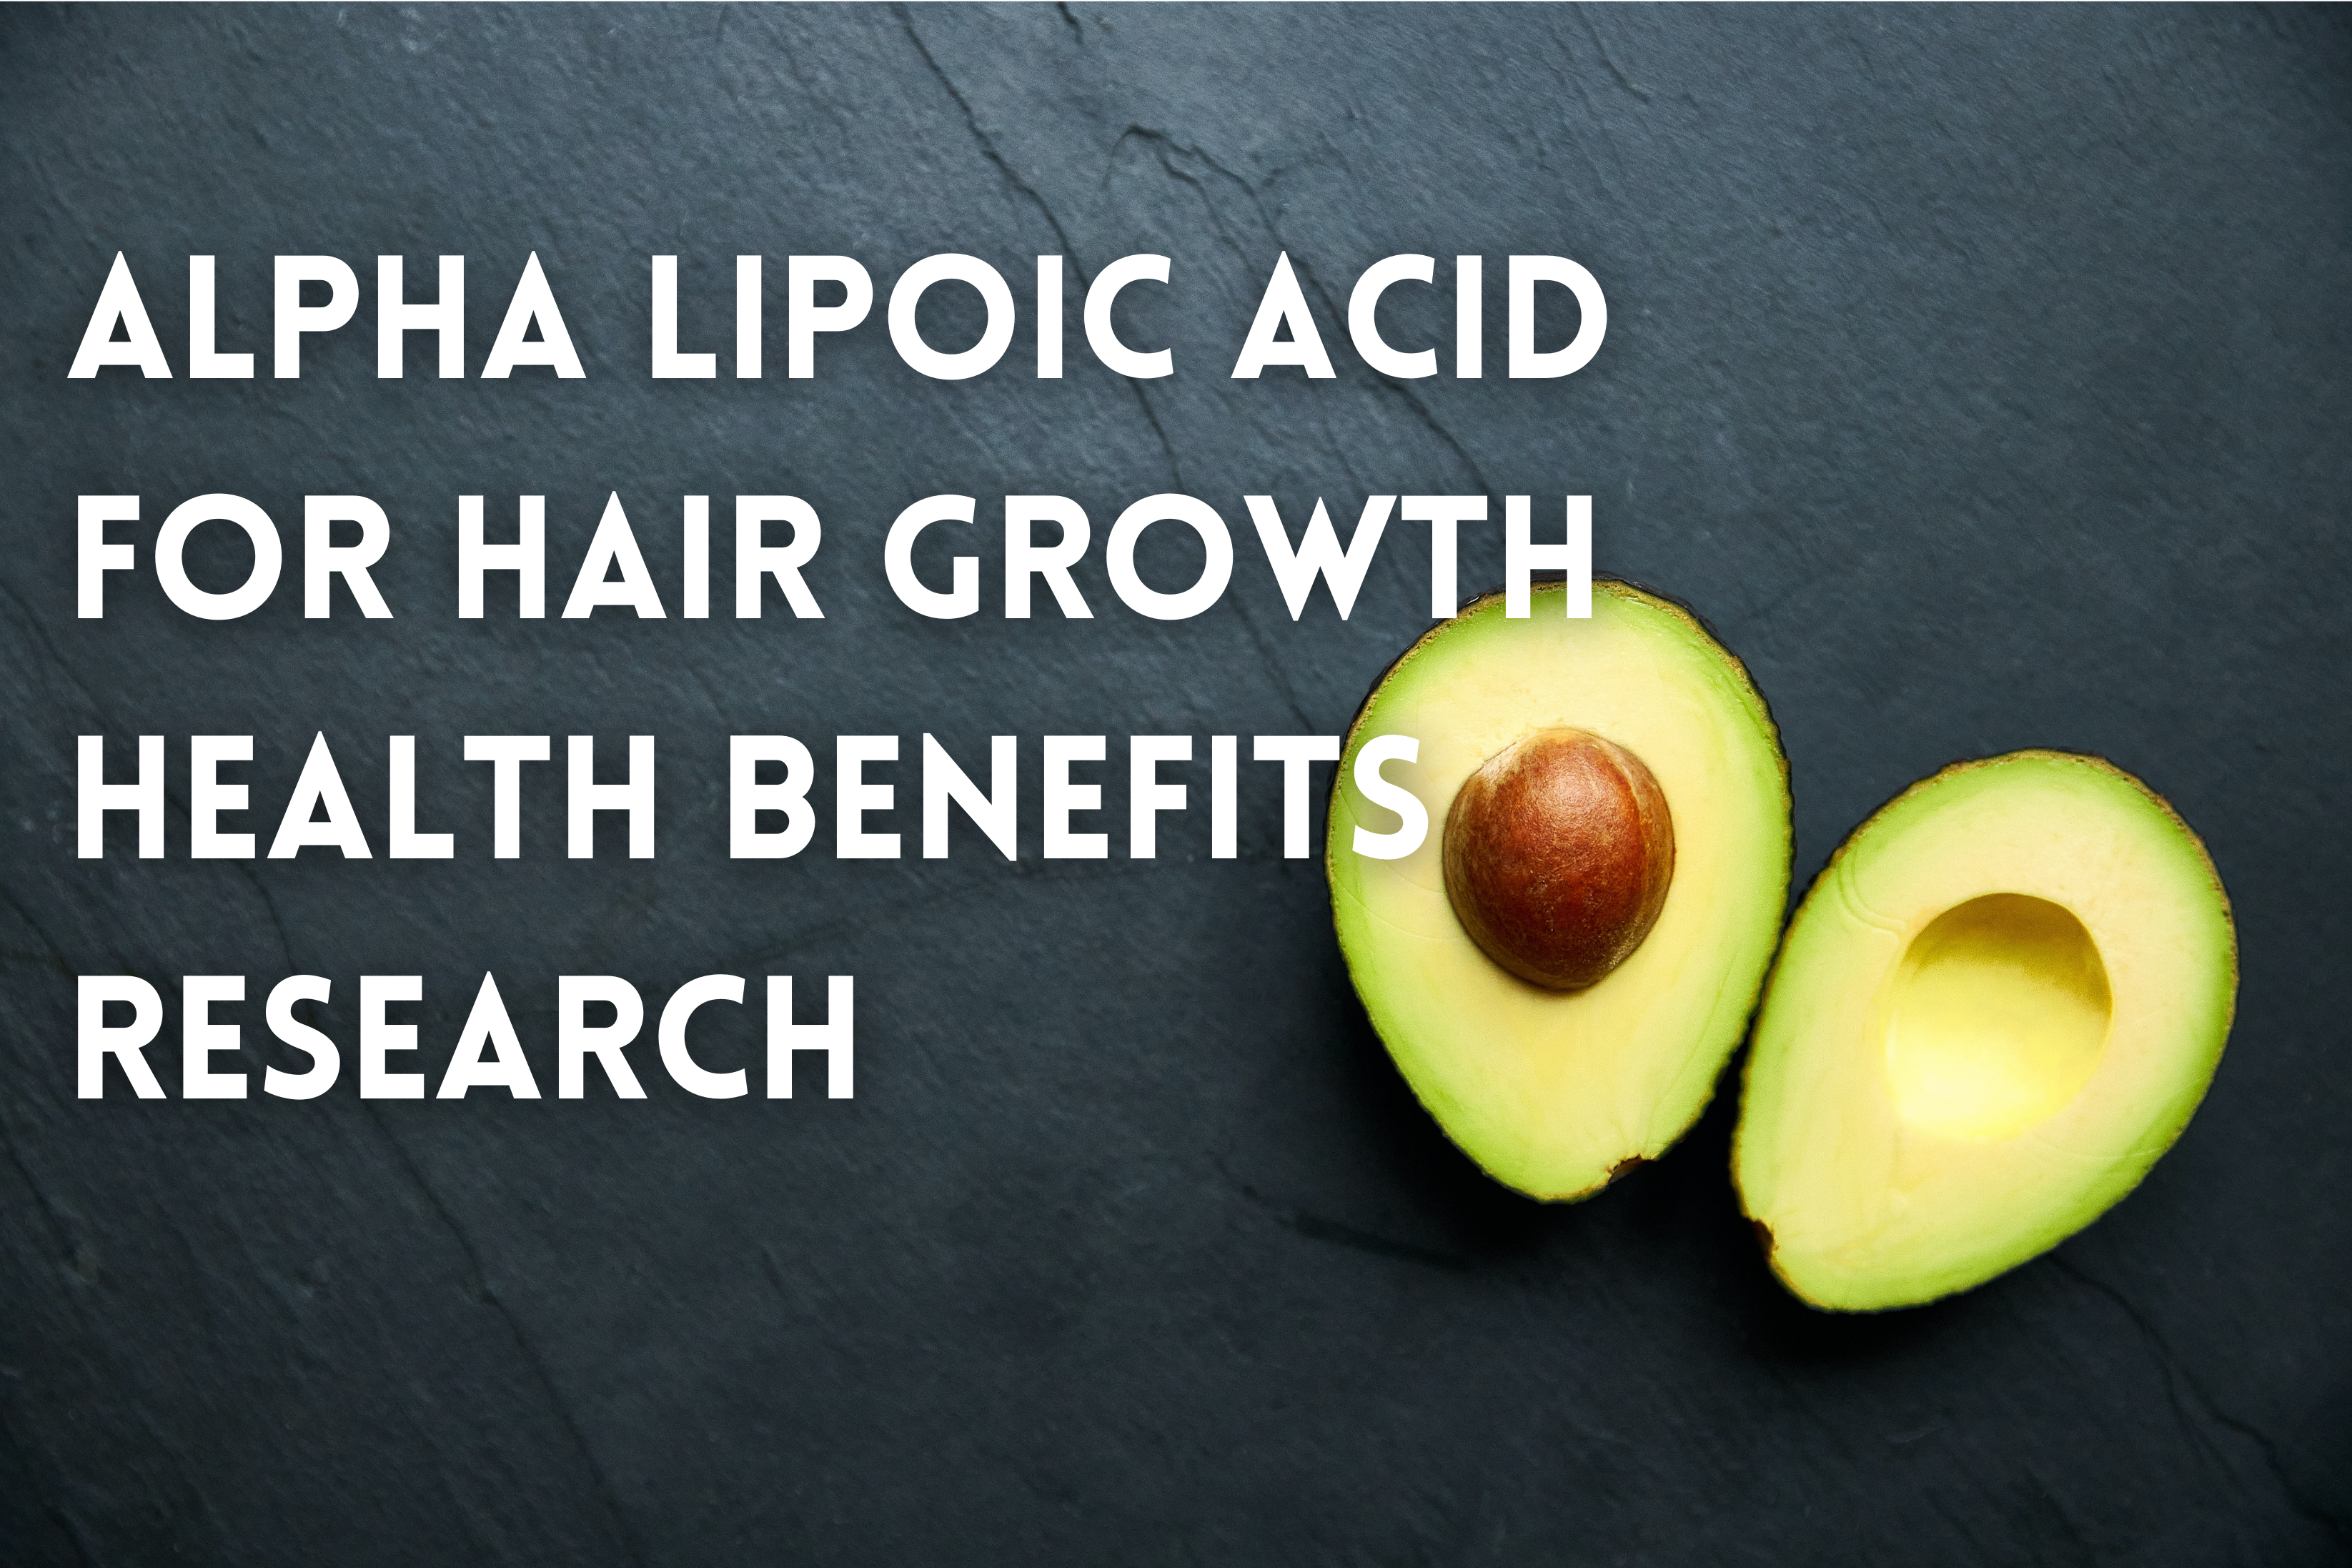 VIDEO: Alpha Lipoic Acid for Hair Growth & Health: Benefits & Research